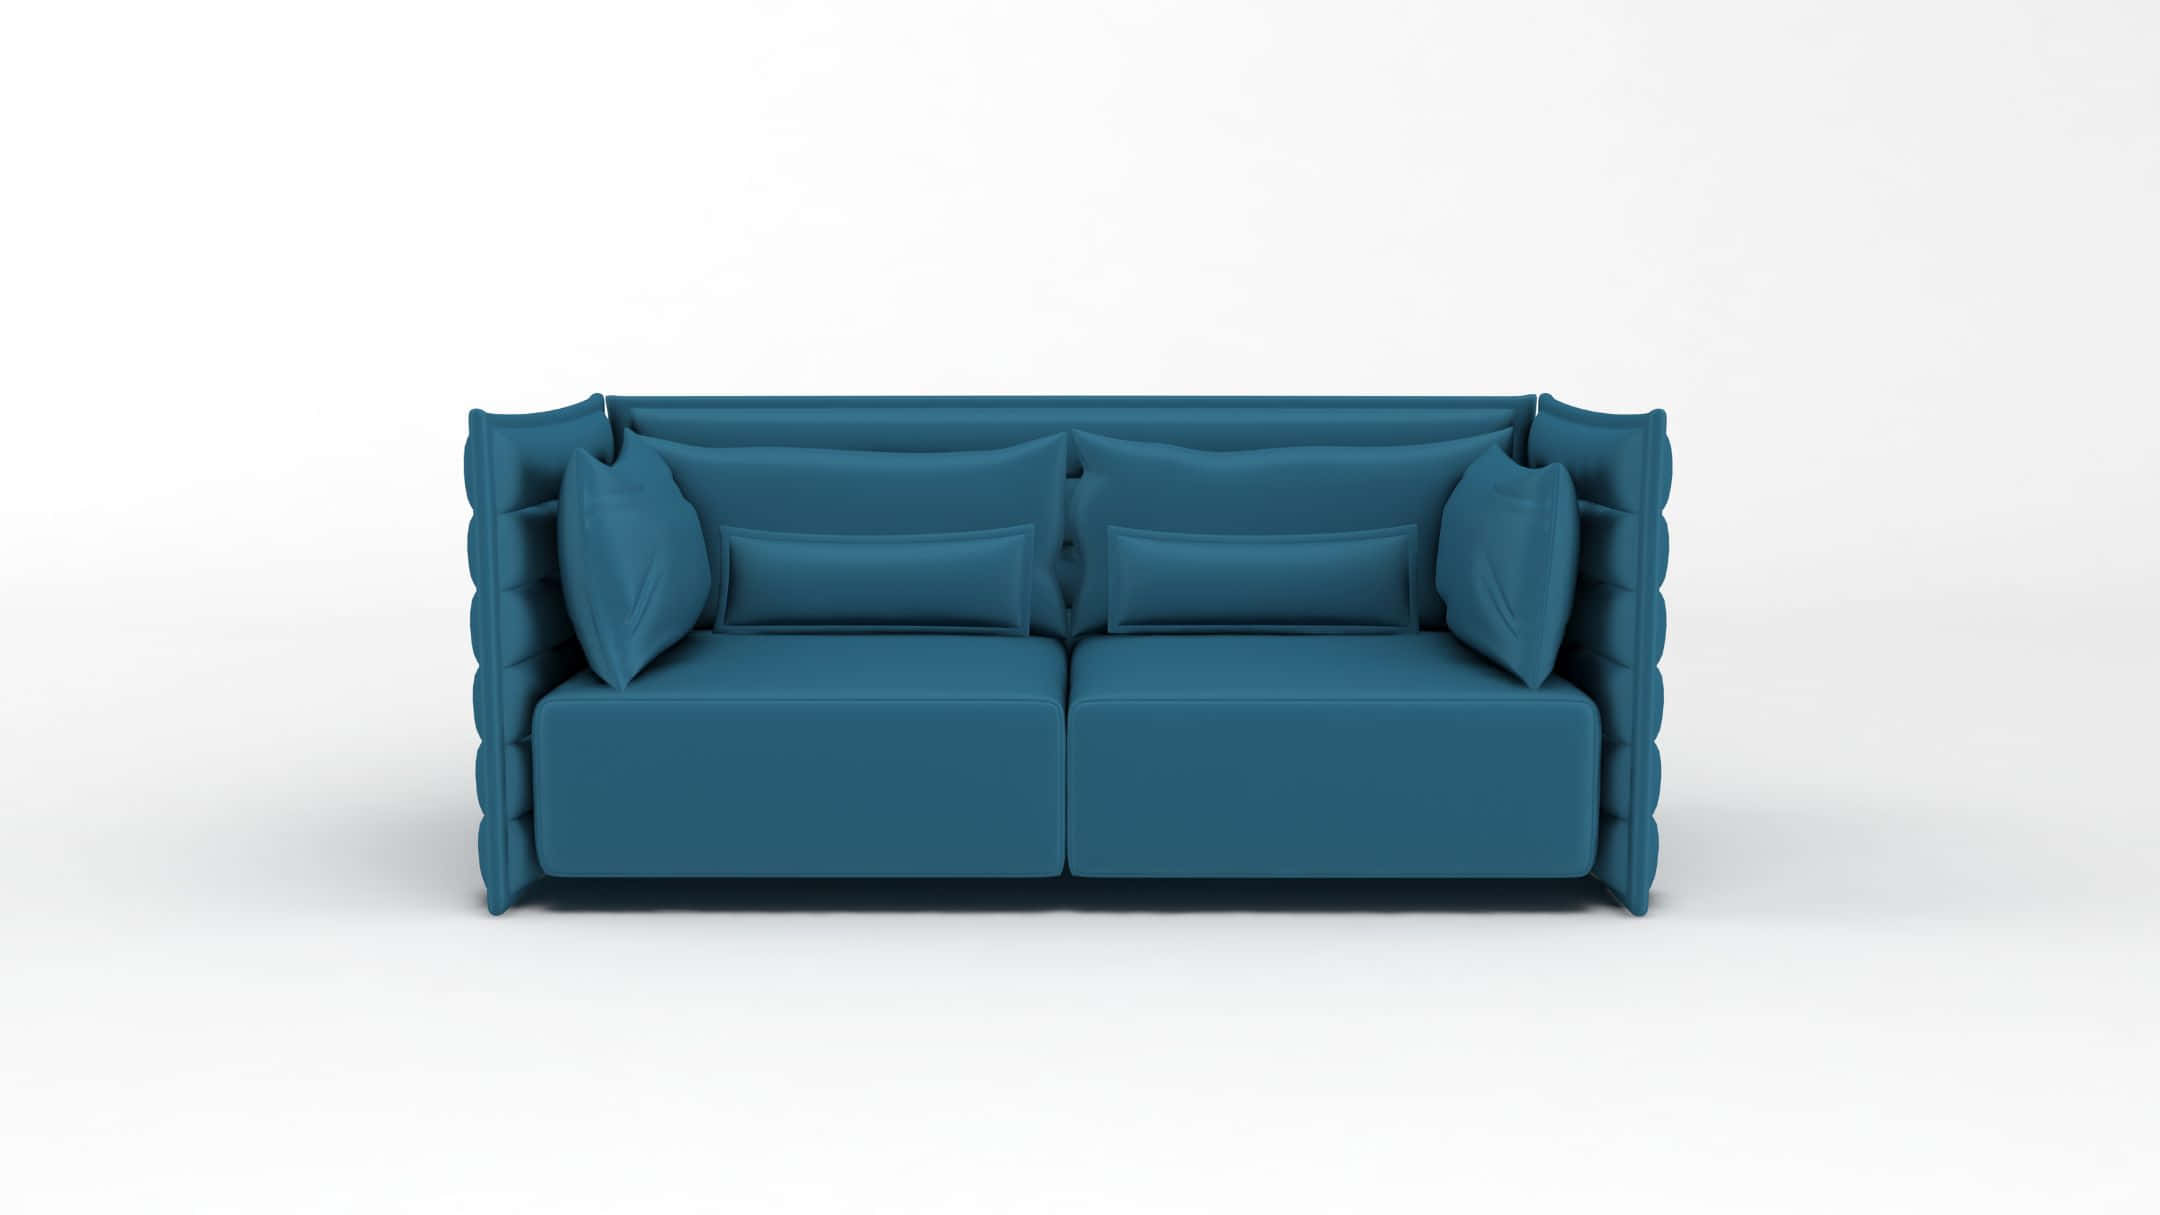 A Blue Sofa With Pillows On It